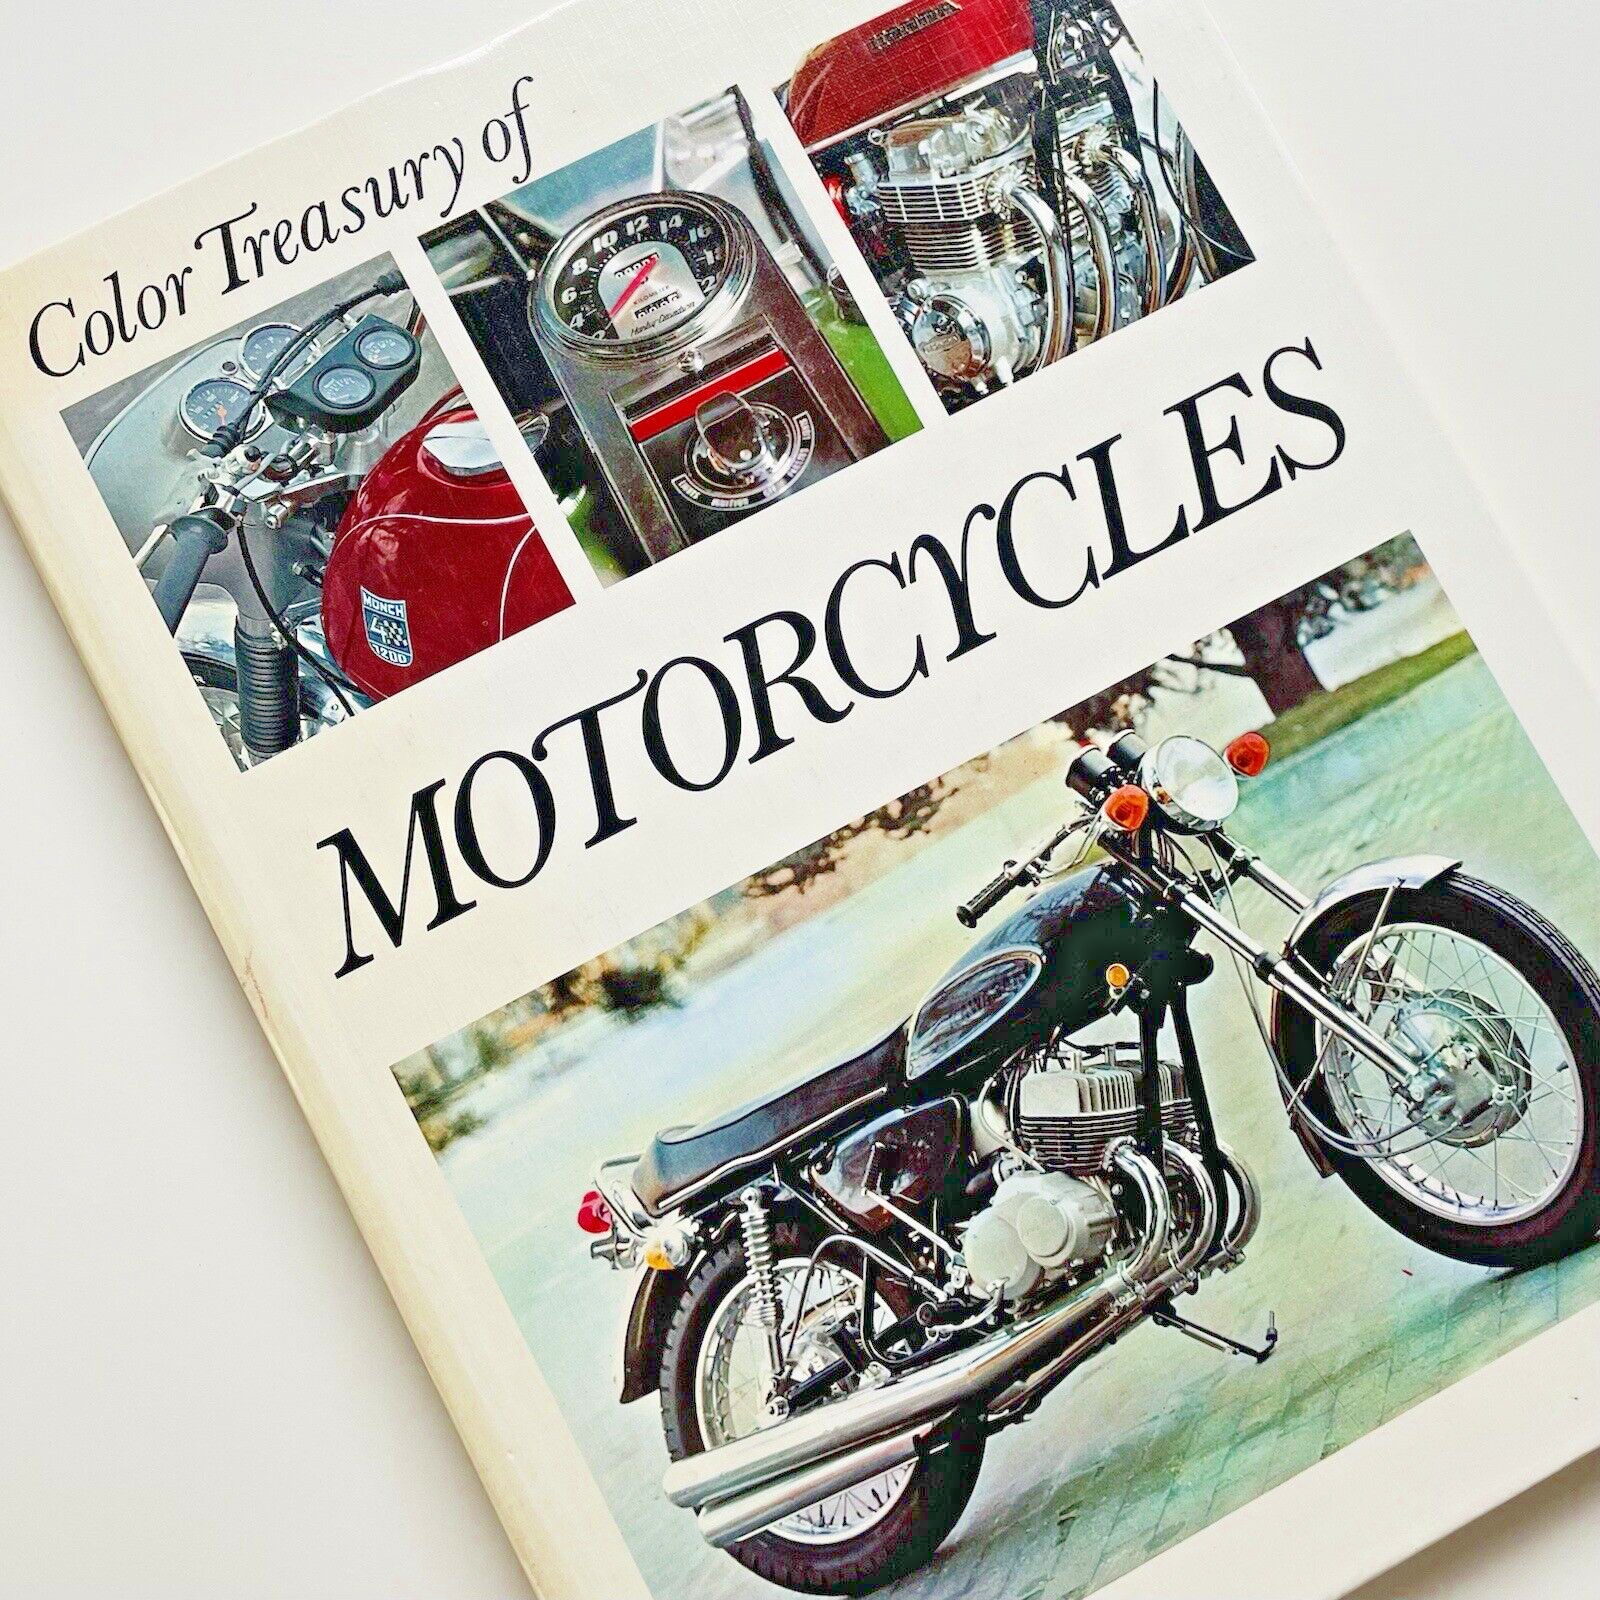 Motorcycles - Color Treasury of Classics & Thoroughbreds - Hardcover - 64 pages